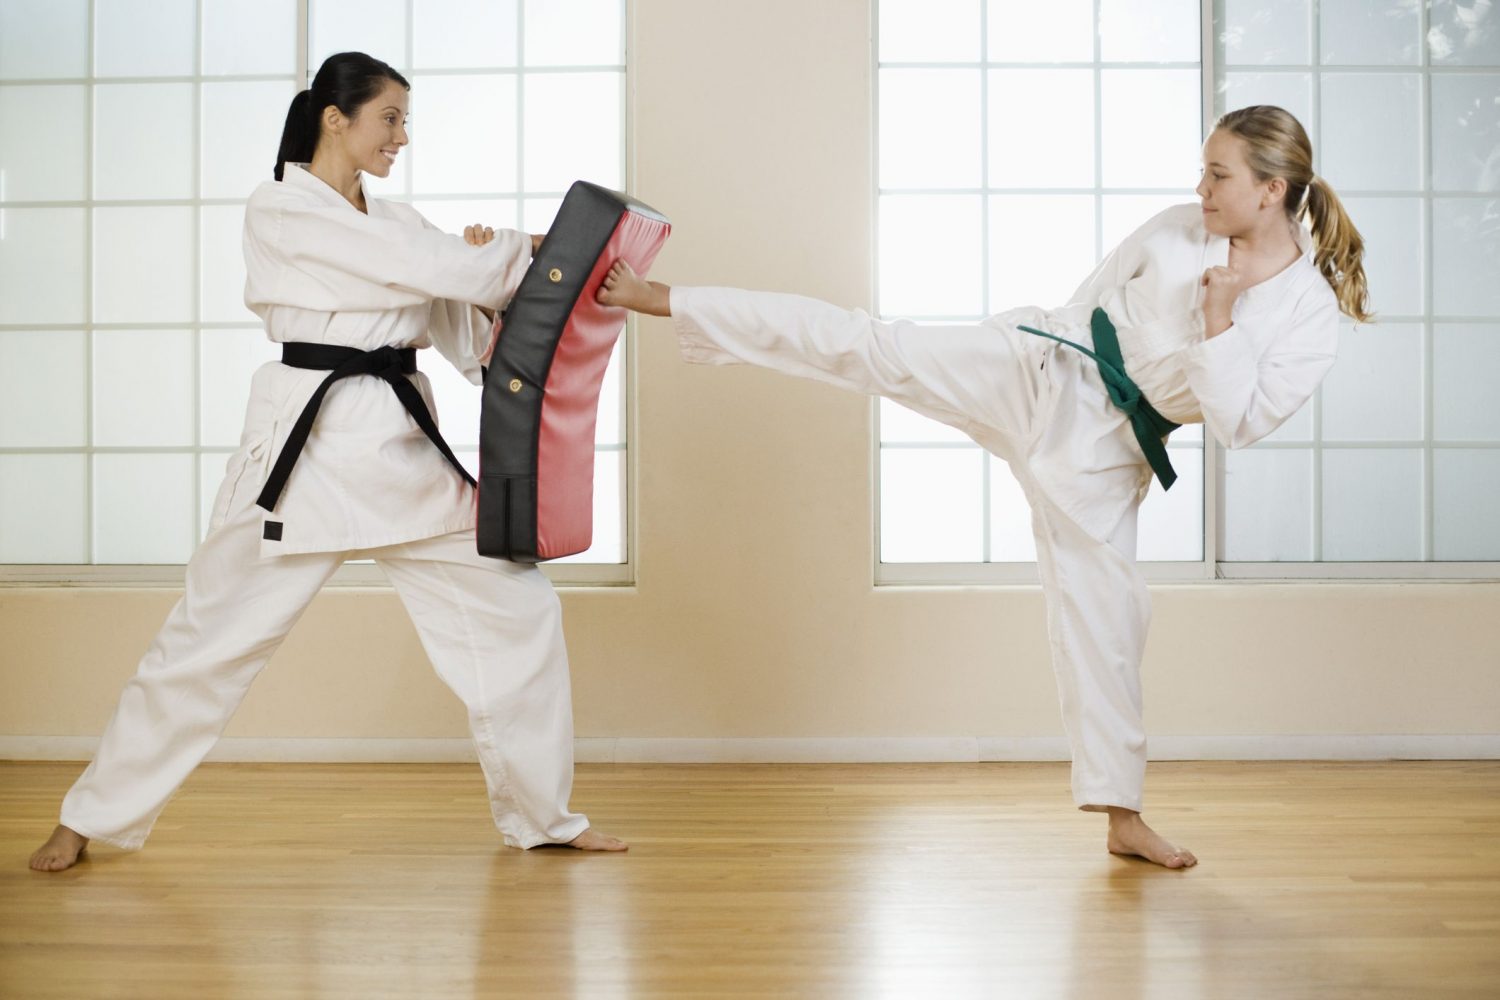 Some Best Health Benefits of Practicing Martial Arts!